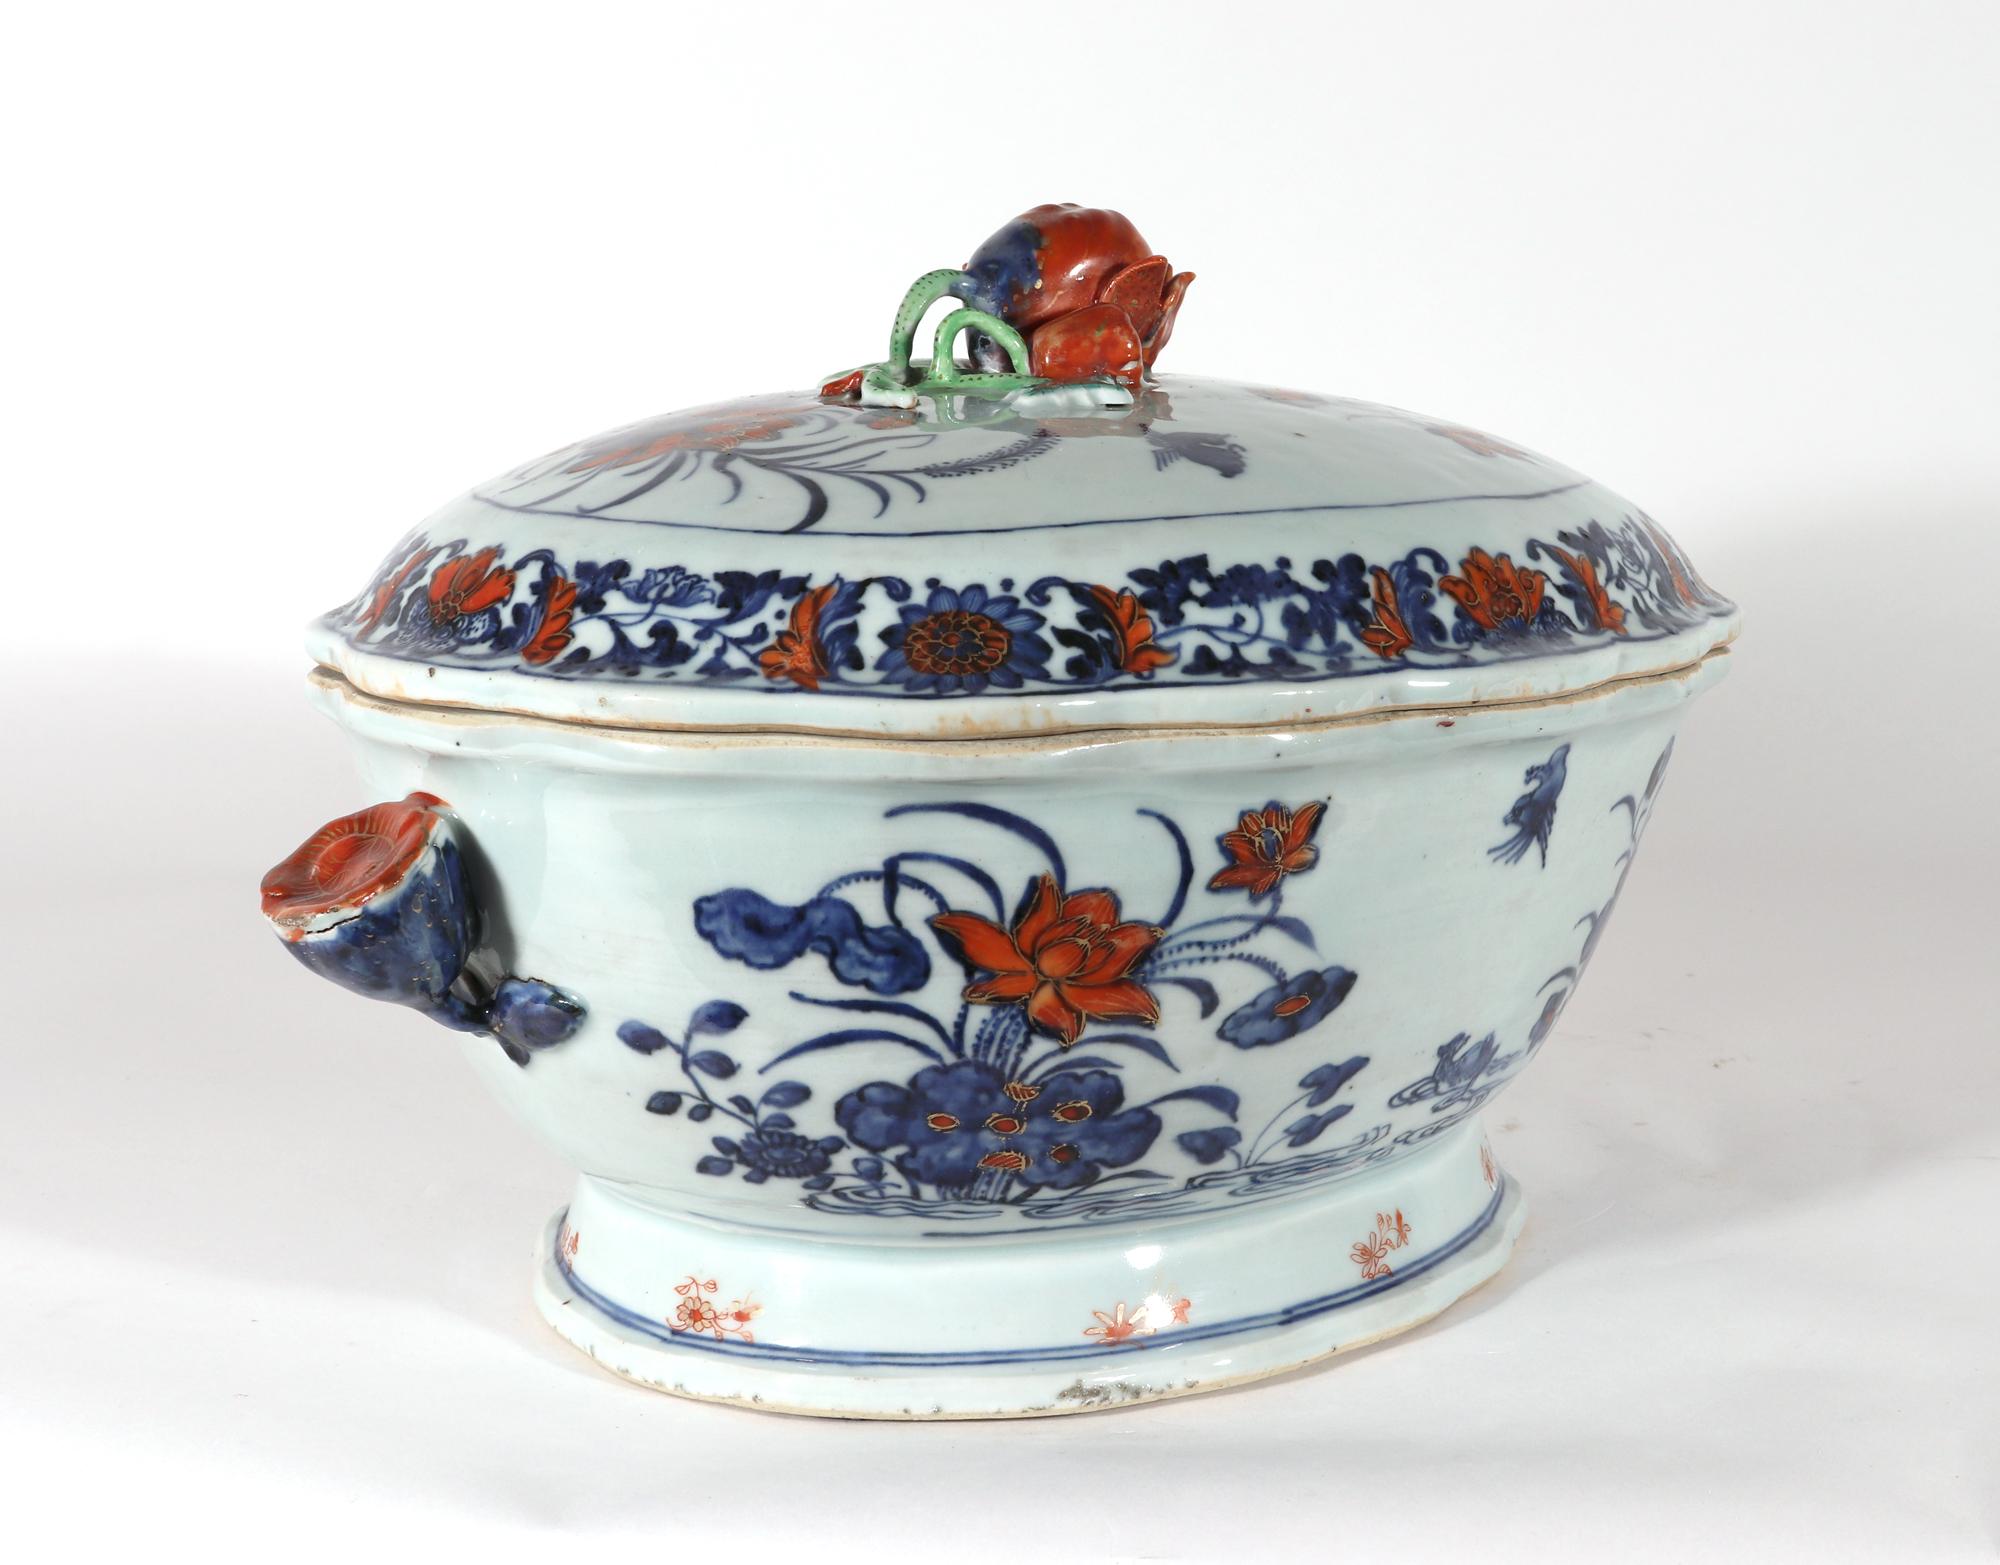 18th Century Chinese Export Porcelain Imari Tureen and Cover-Duck in Pond For Sale 4